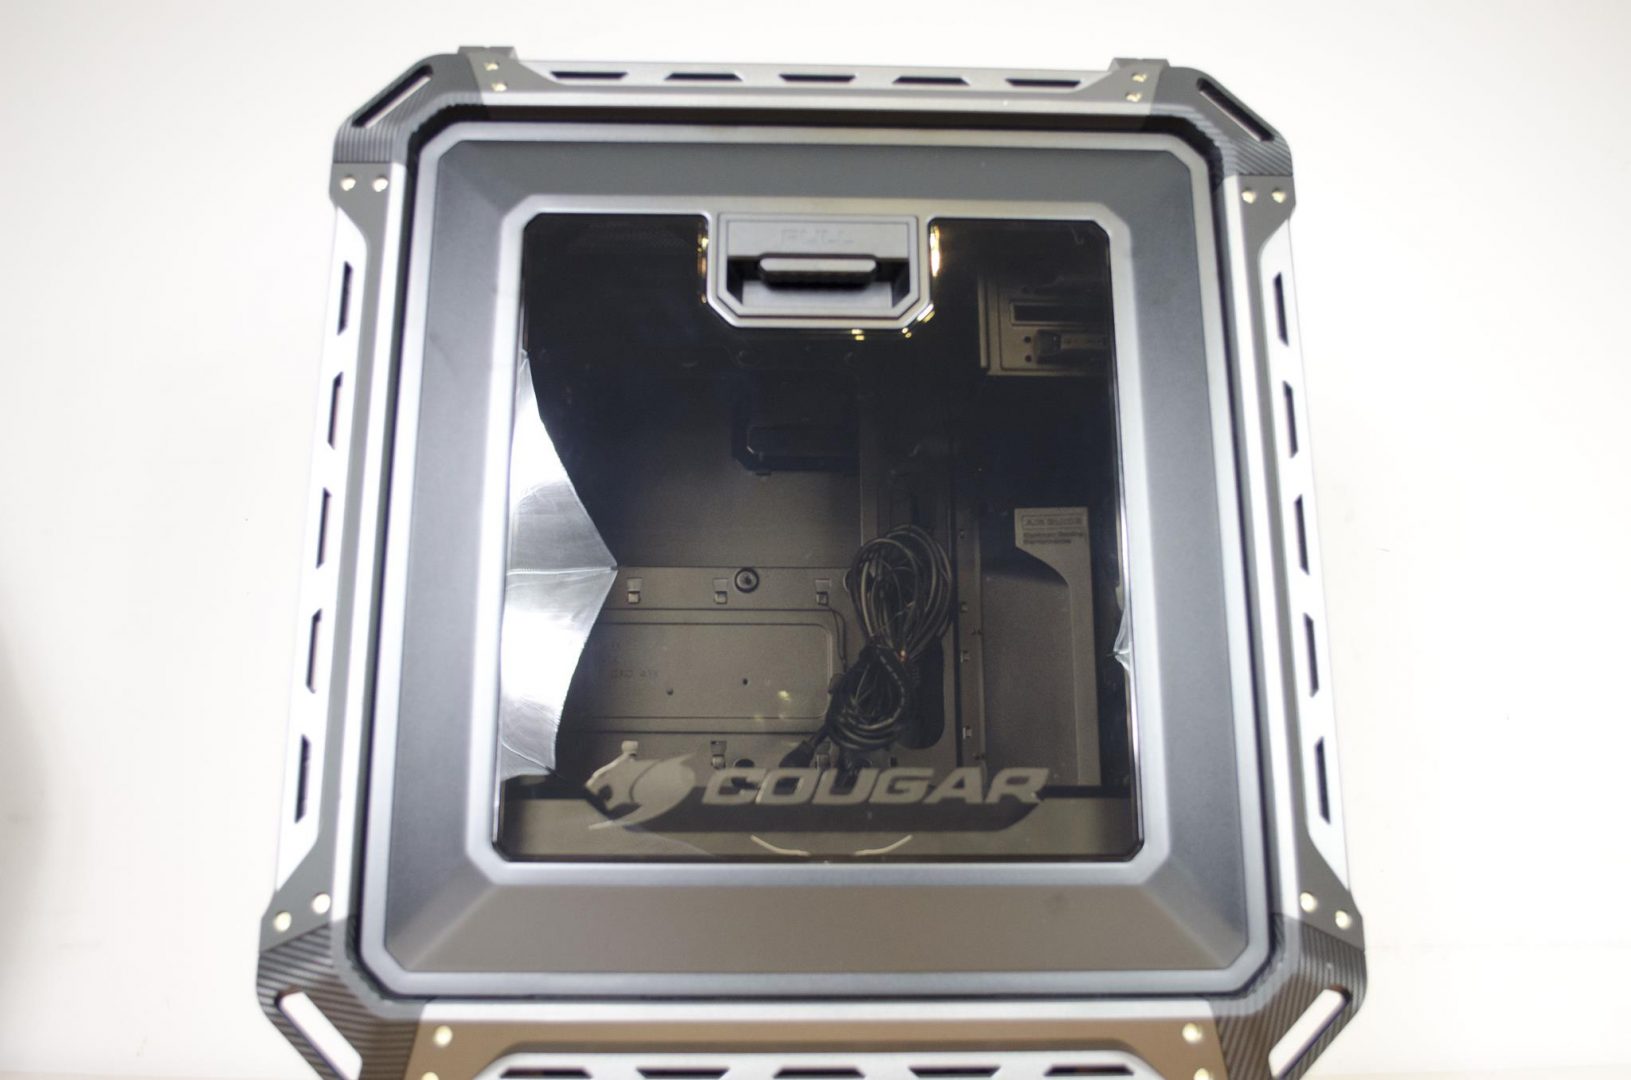 Cougar Panzer Max Full Tower Case Review